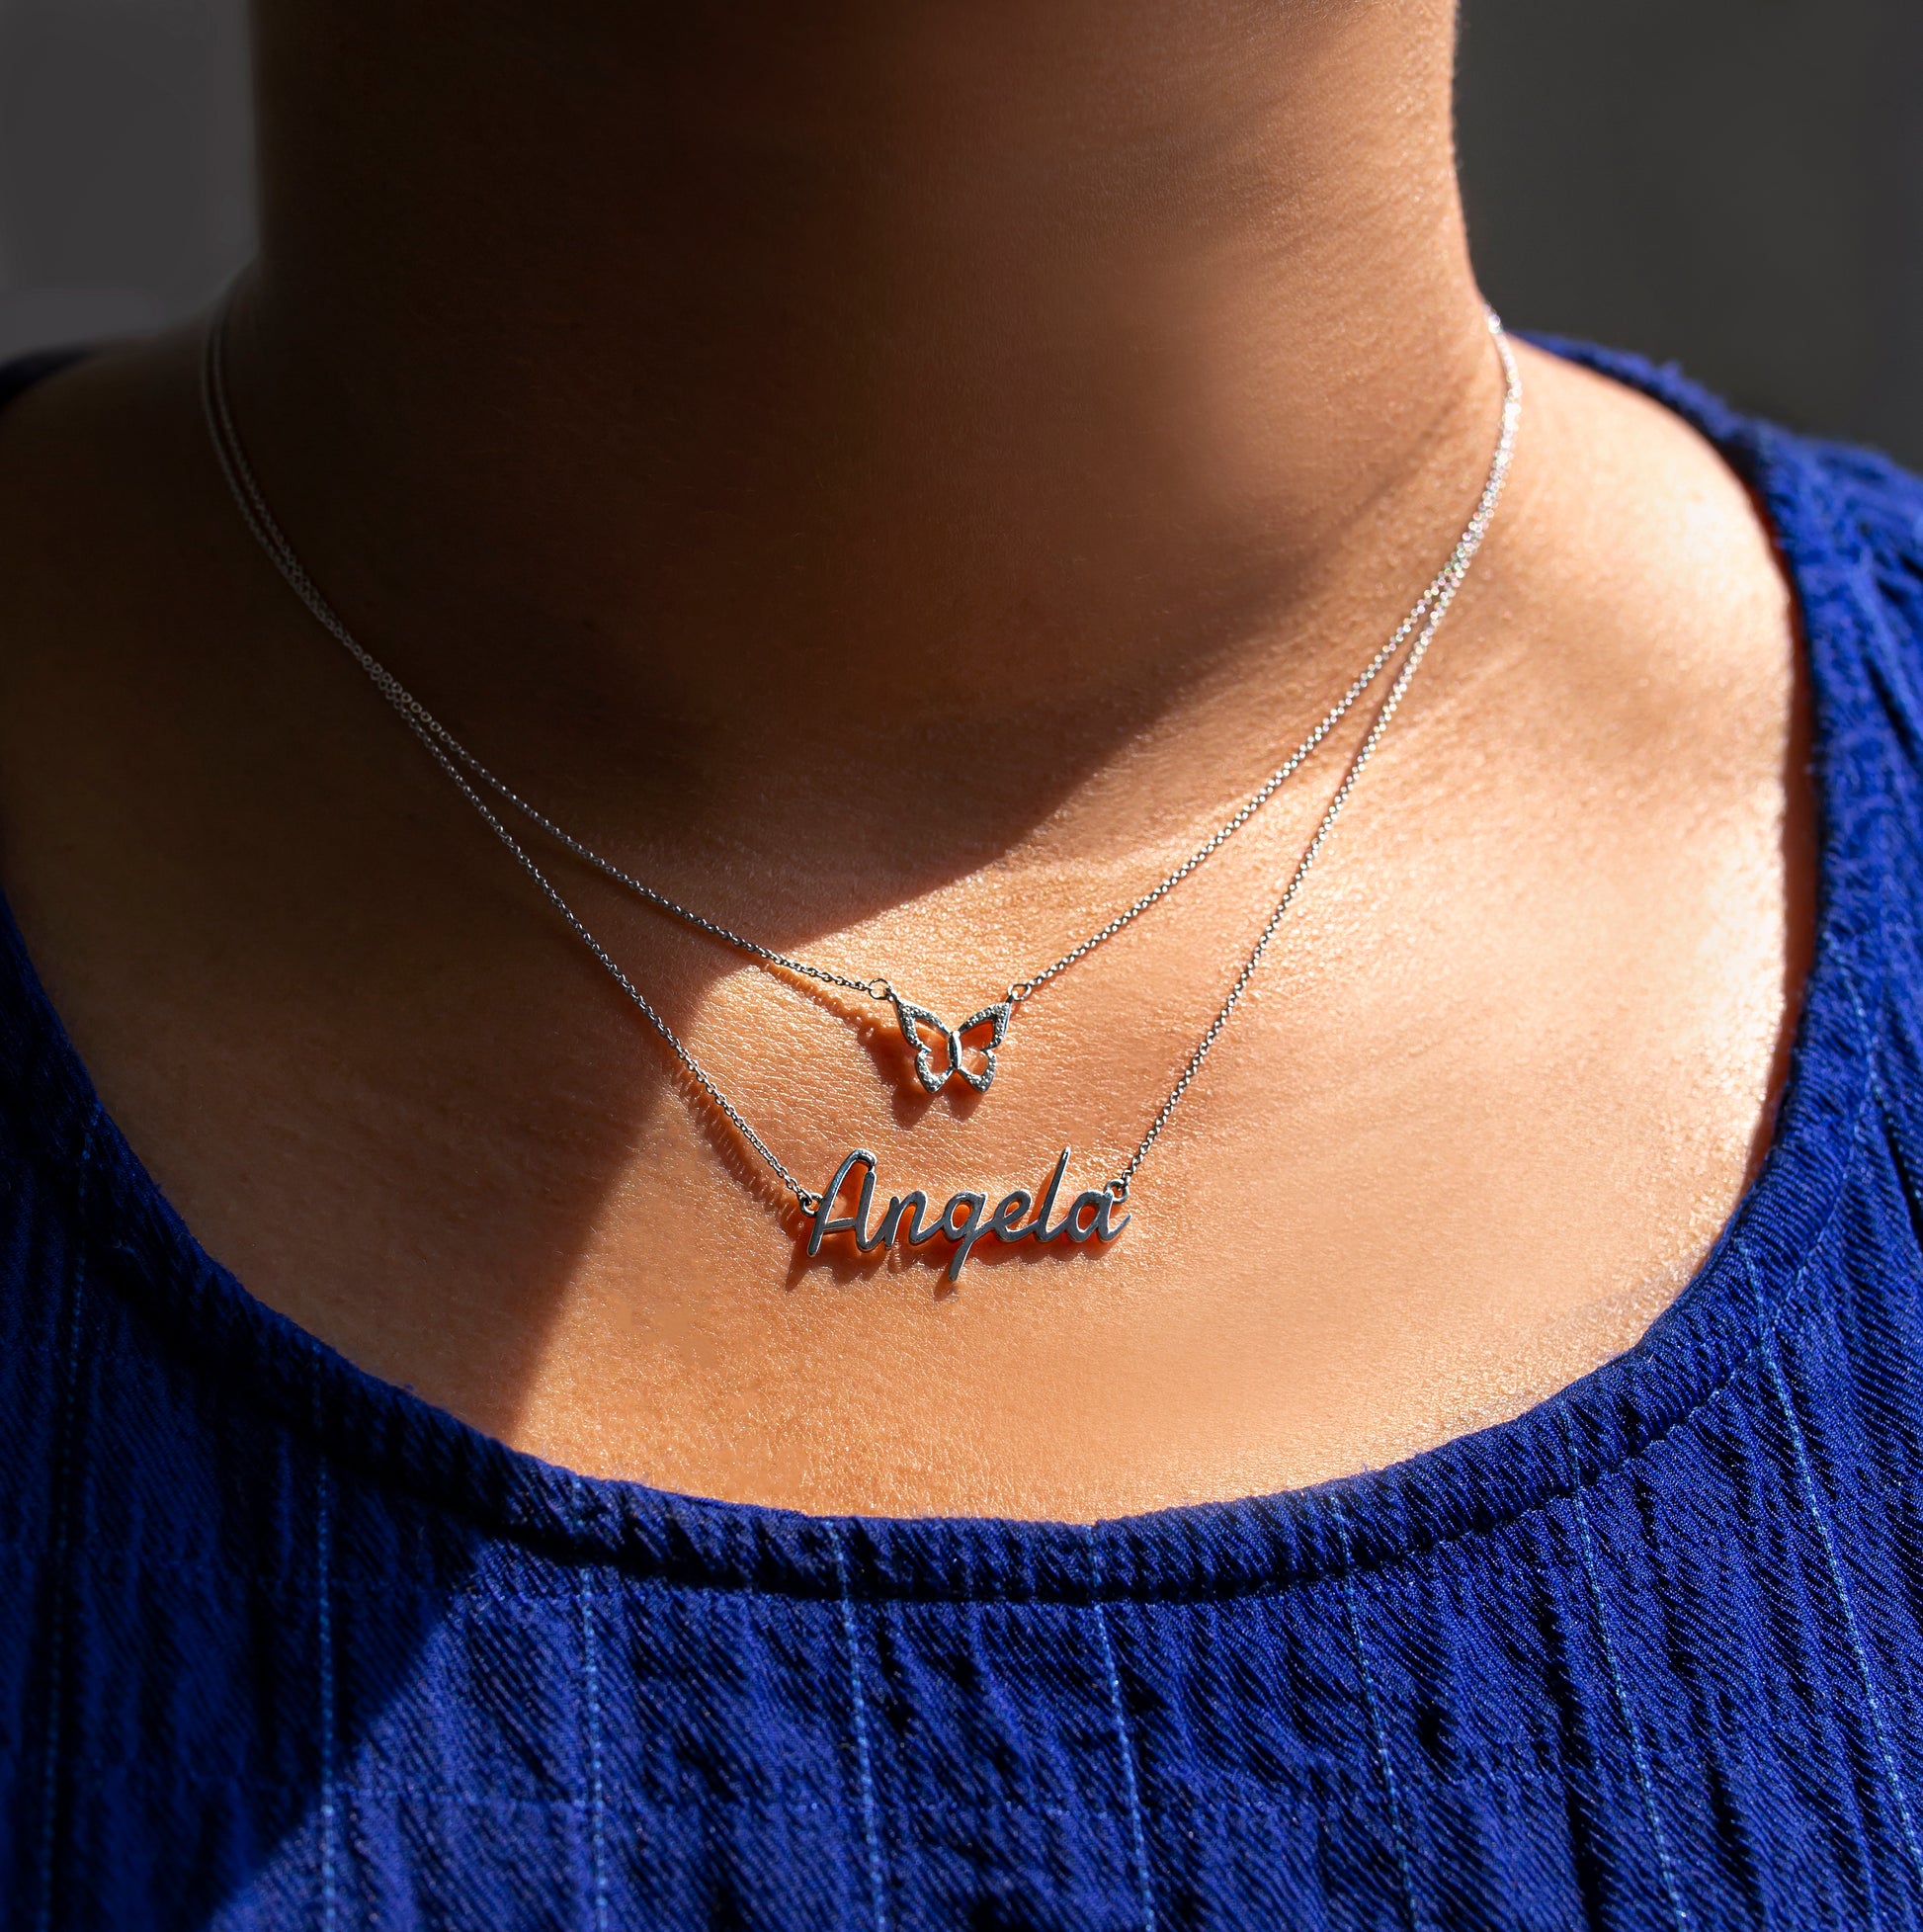 Farfalla Butterfly Diamond Necklace With Angela Text